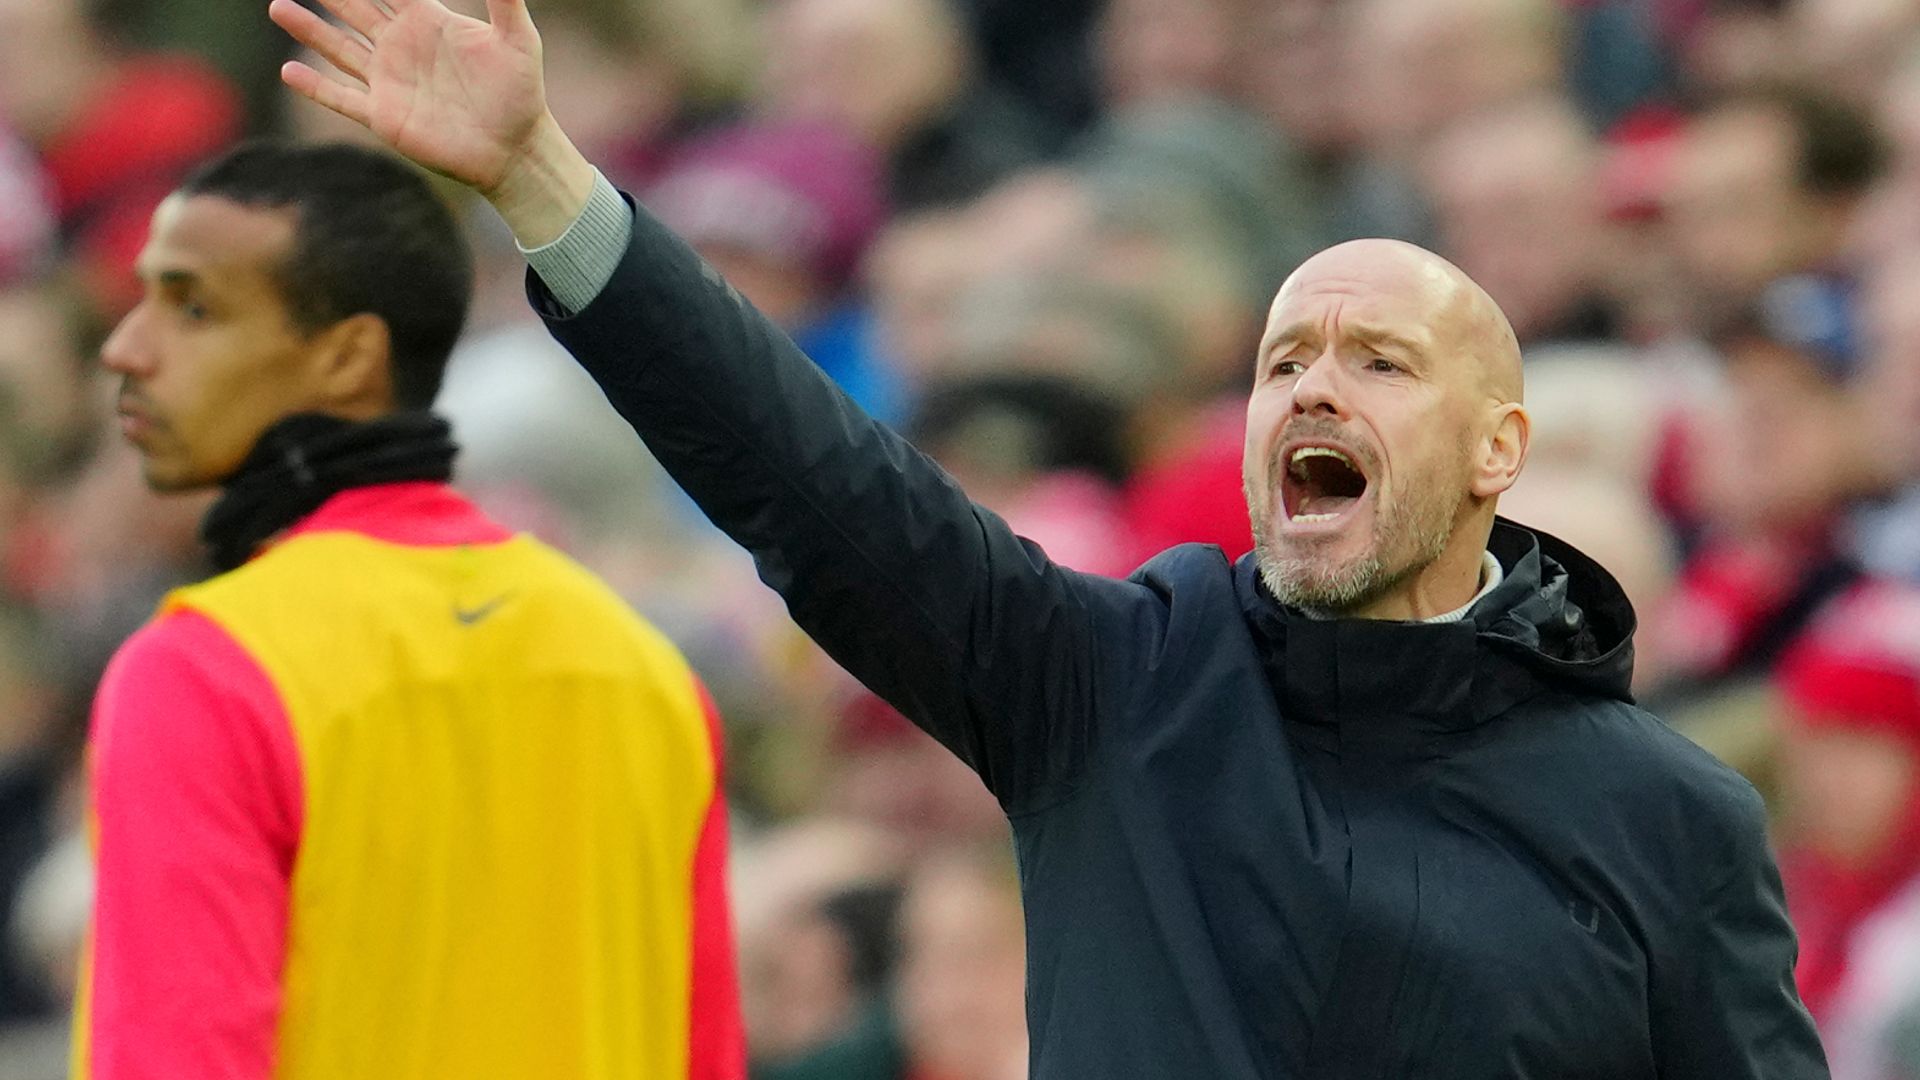 How Ten Hag gave Man Utd dressing down after Liverpool humiliation